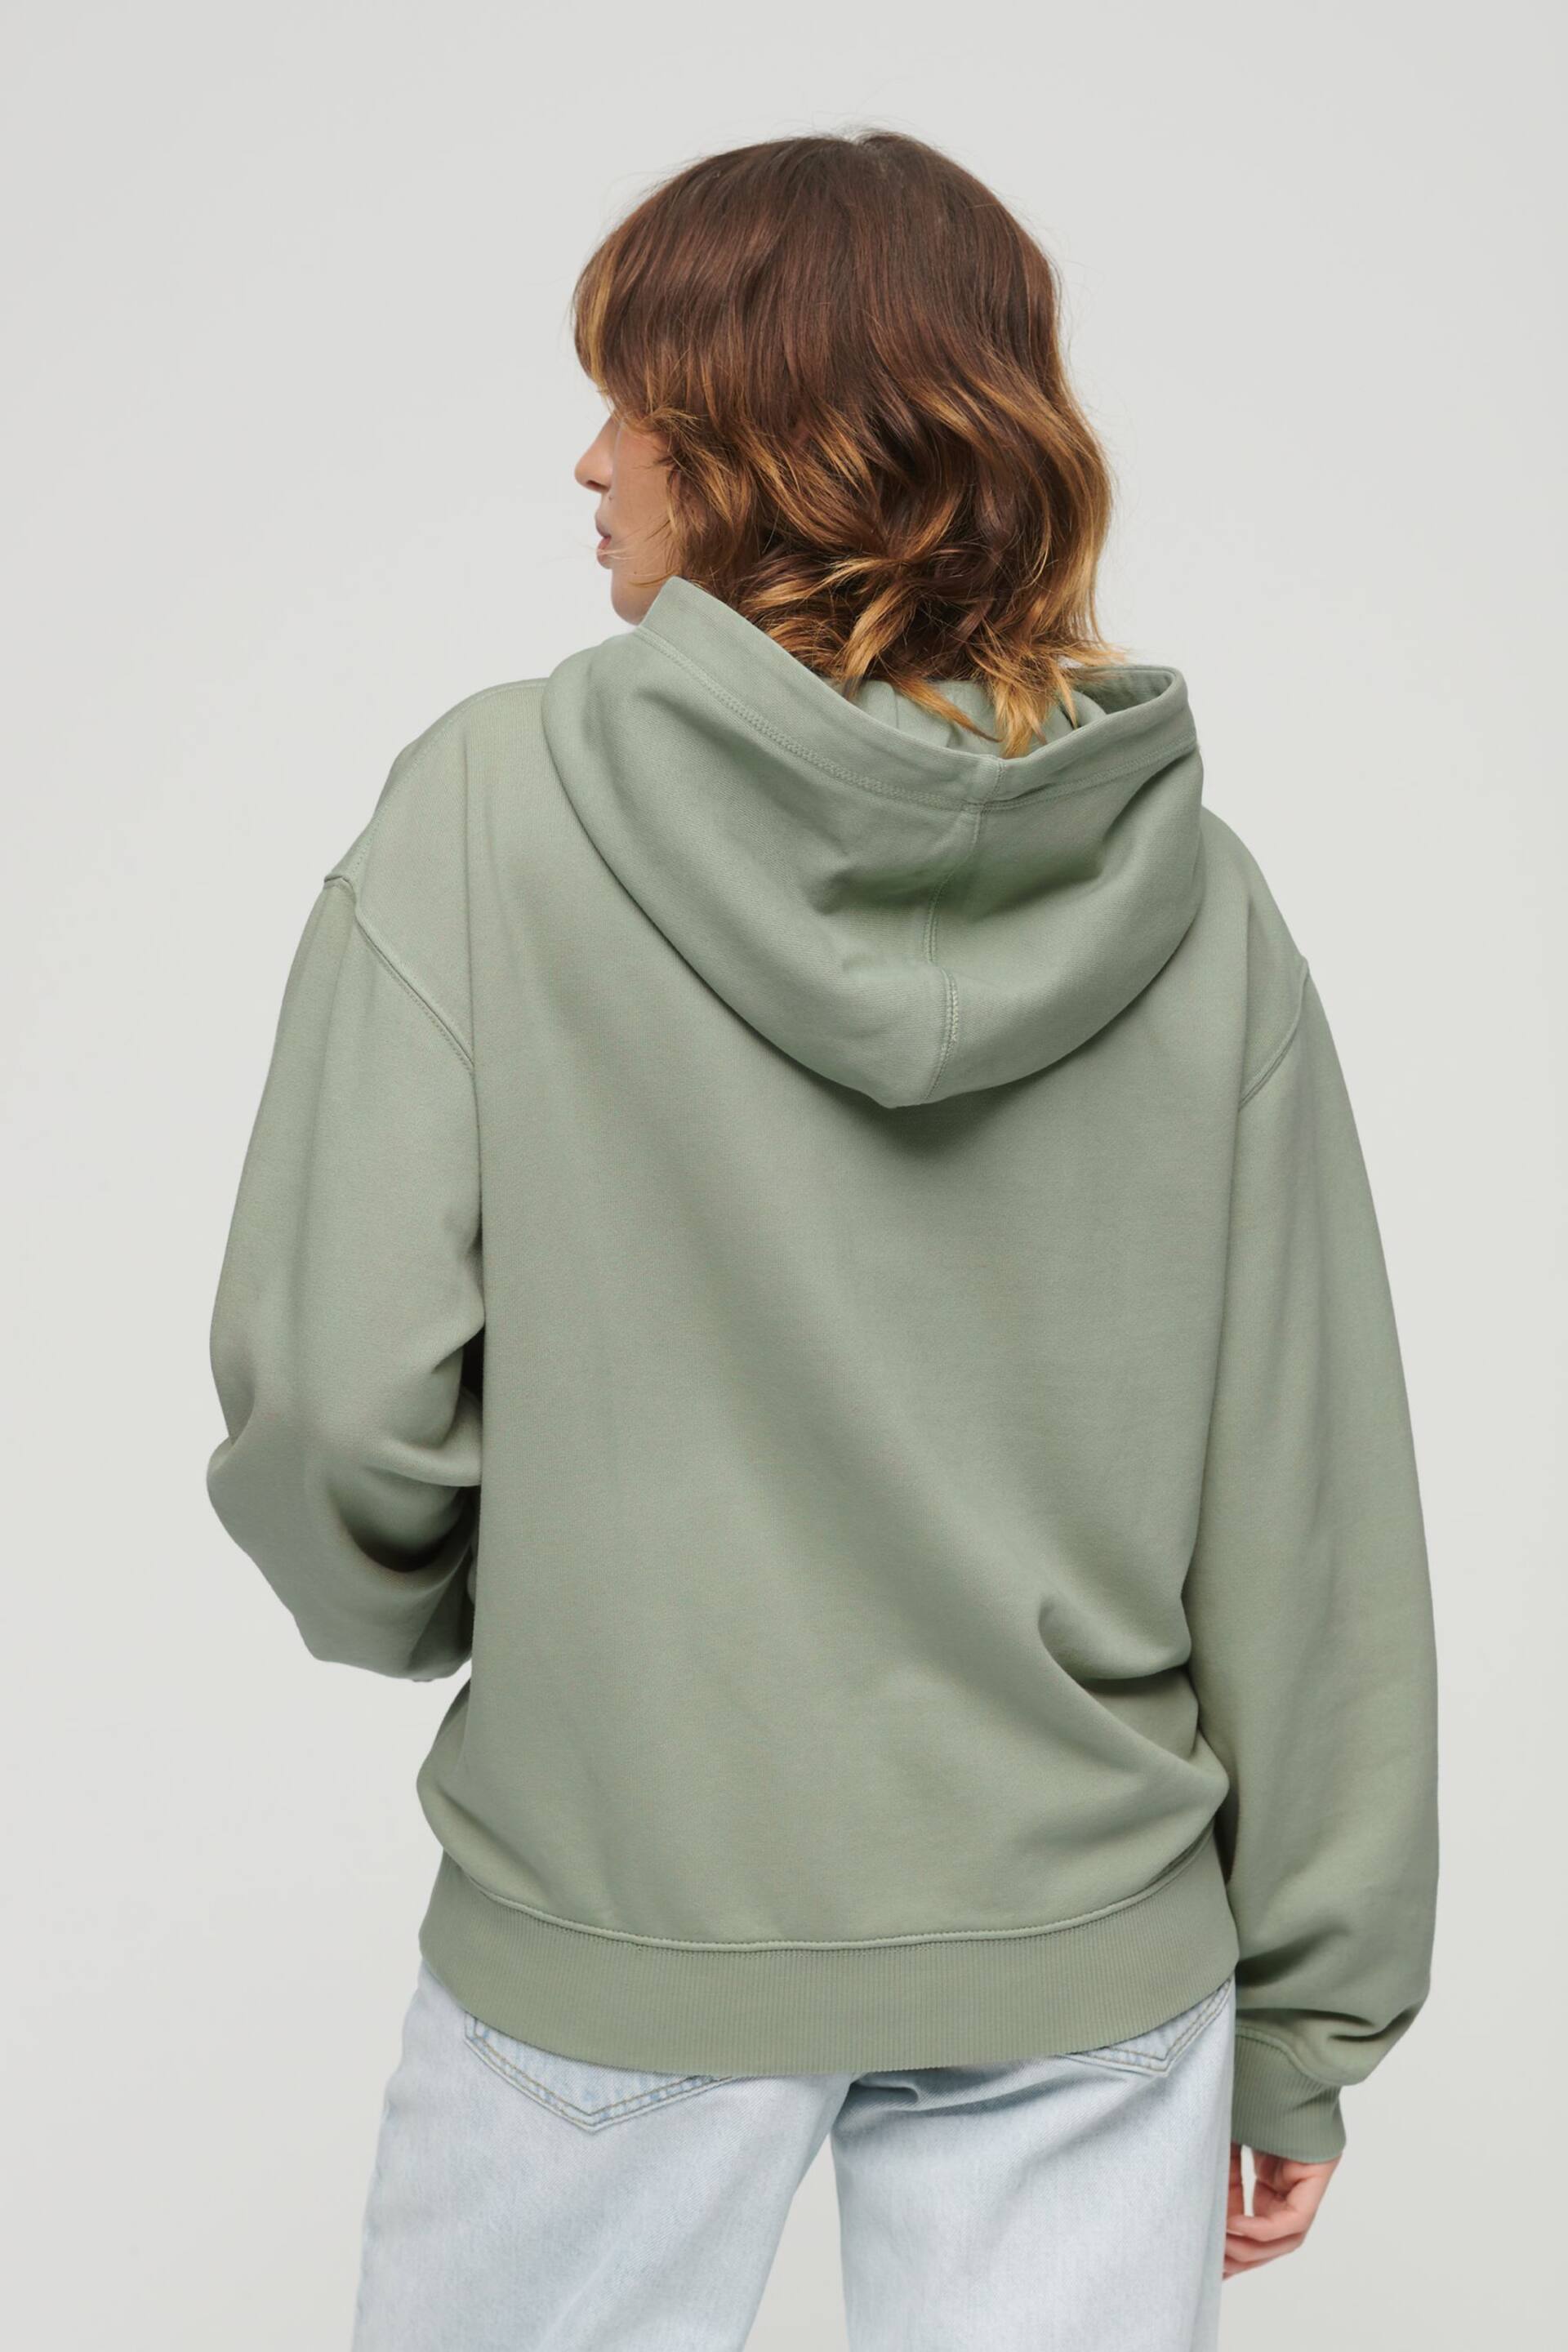 Superdry Green Micro Logo Embroided Loose Hoodie - Image 2 of 6